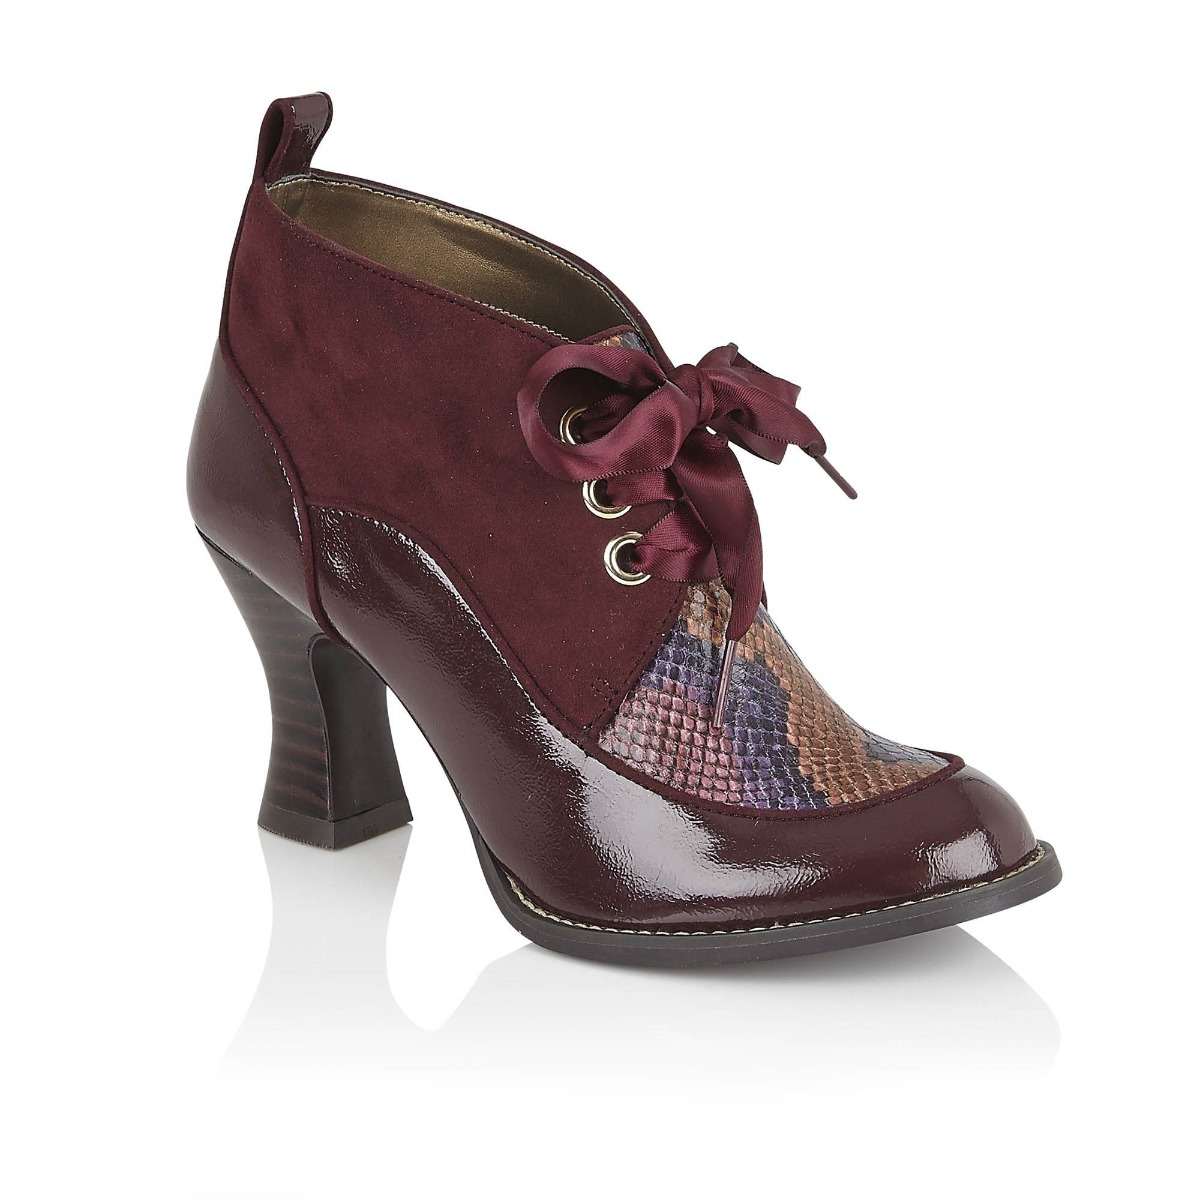 rs09350b_chaussures-bottines-pin-up-retro-50-s-glam-chic-emma-bordeaux